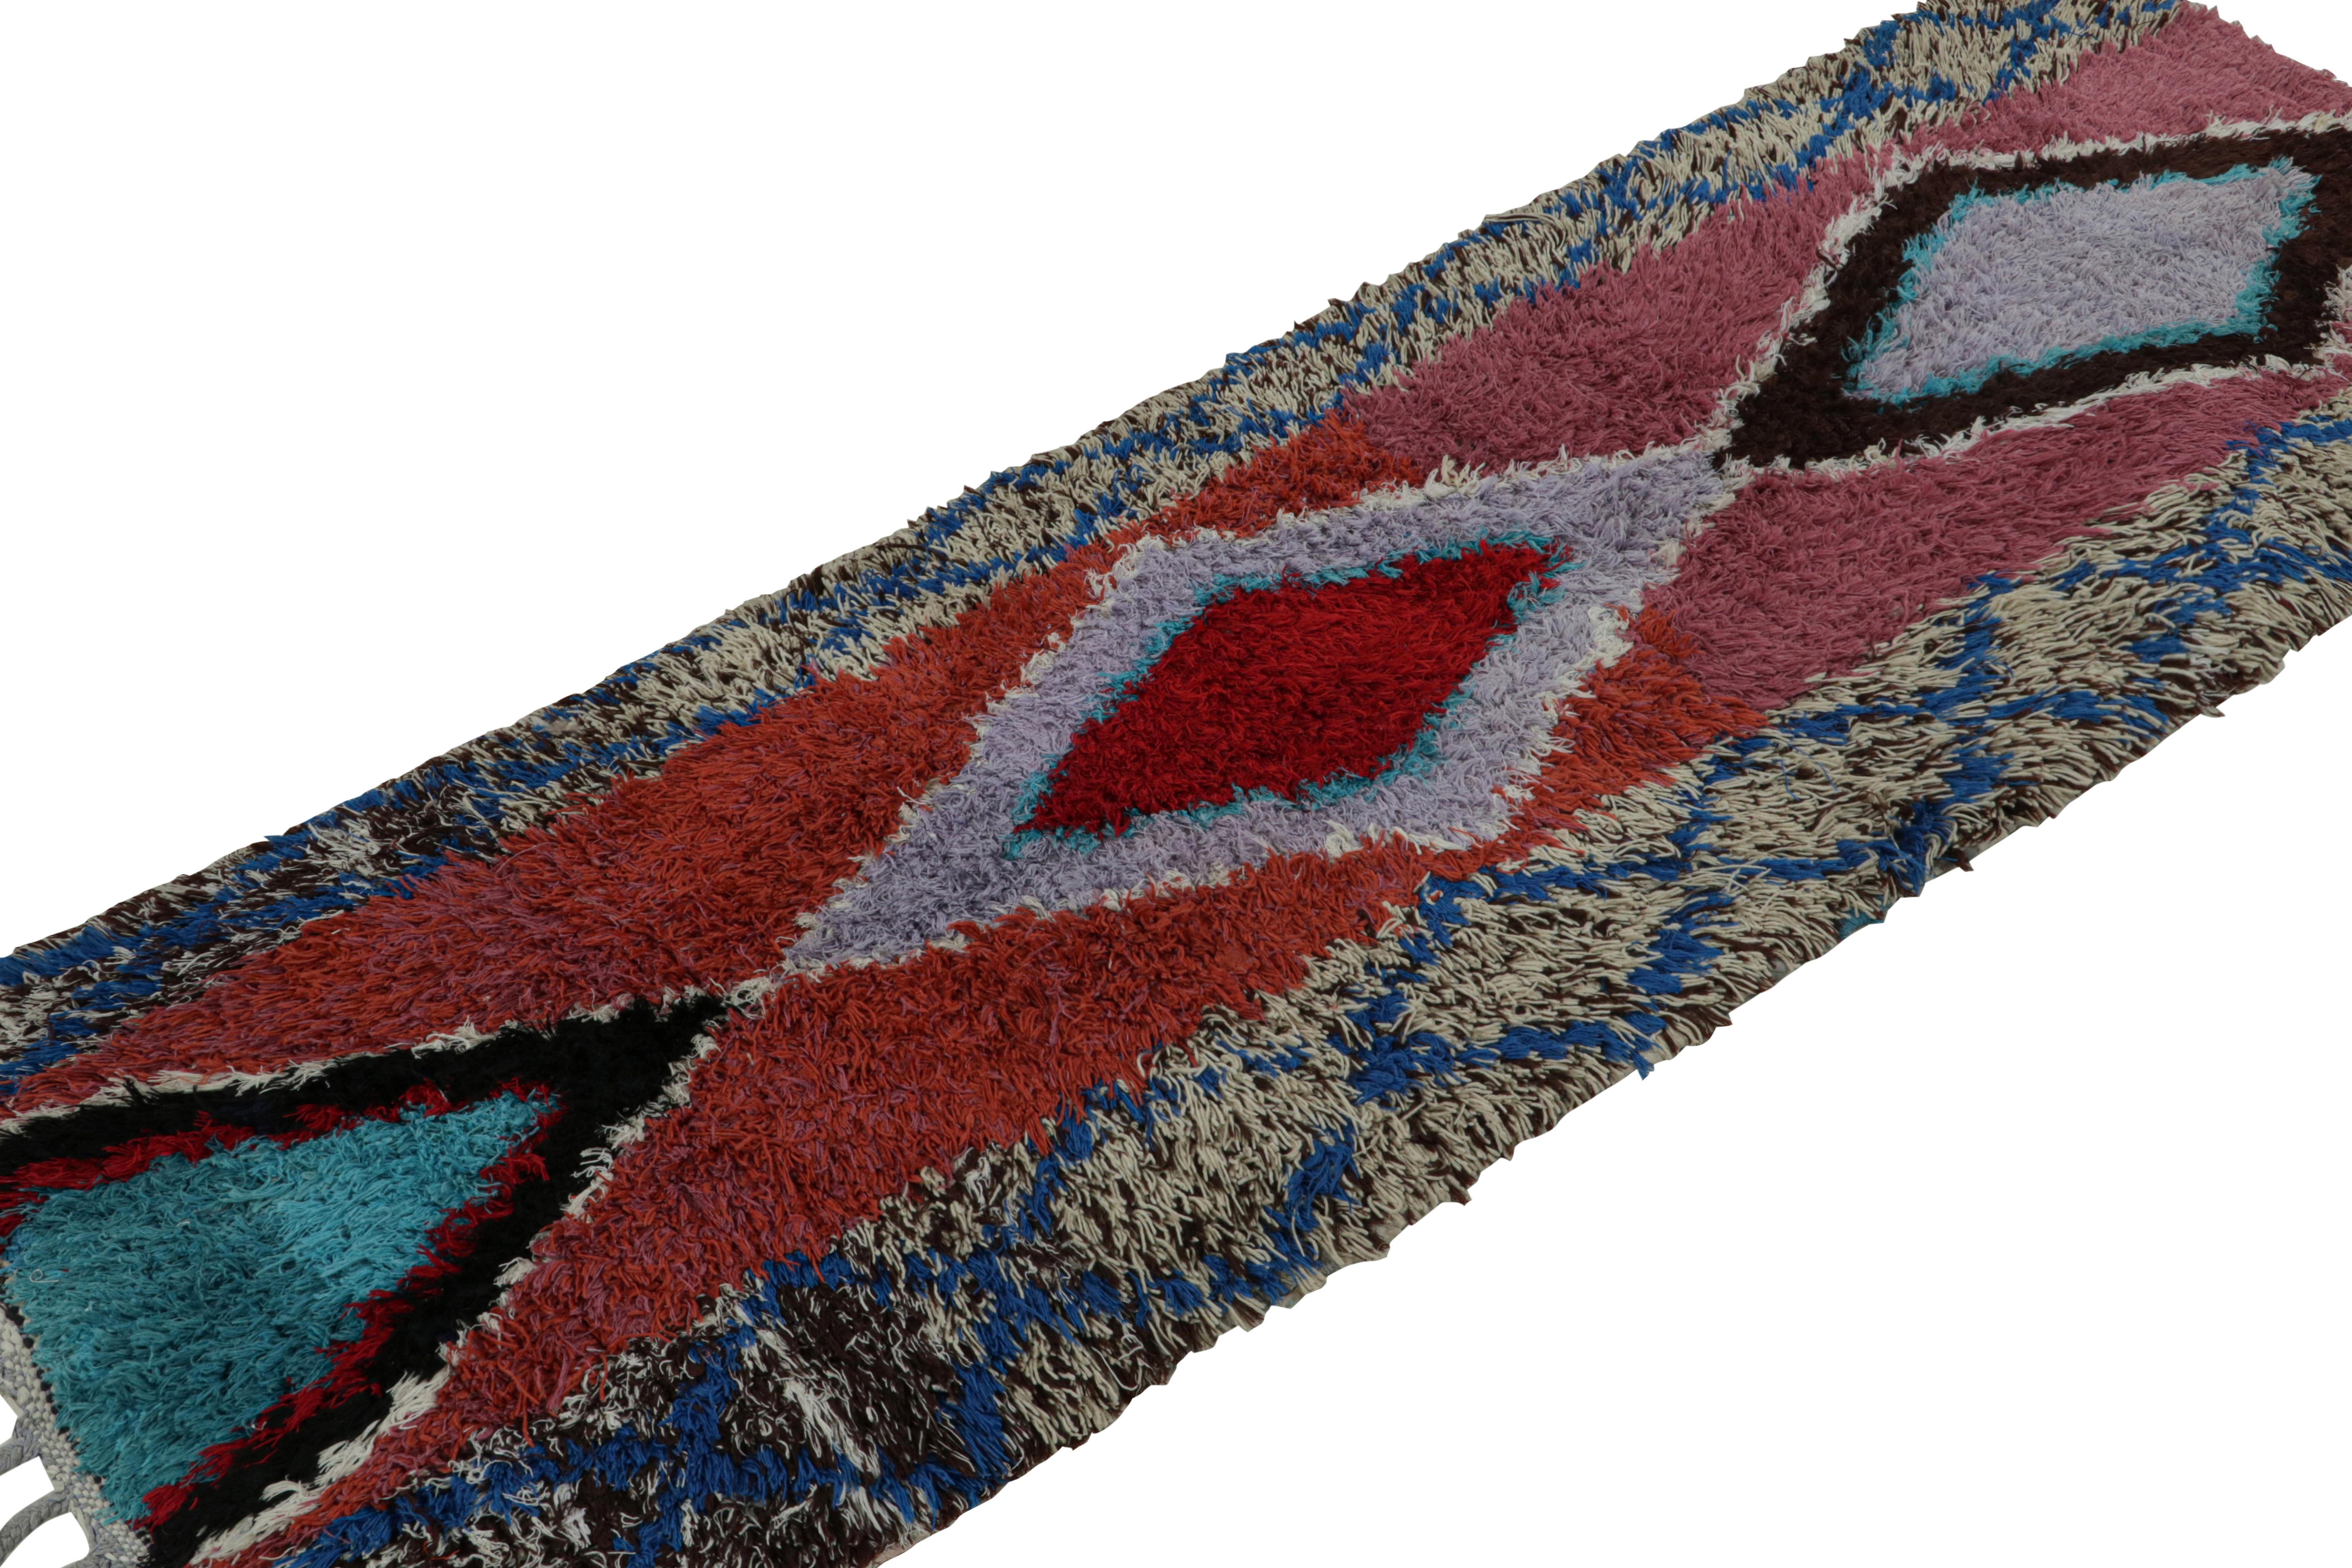 Hand-knotted in wool circa 1950-1960, this vintage 2x6 Moroccan rug is believed to hail from the Azilal tribe. 

On the Design: 

The rug features polychromatic medallions. Keen eyes will particularly note red underscoring purple and blue lozenge